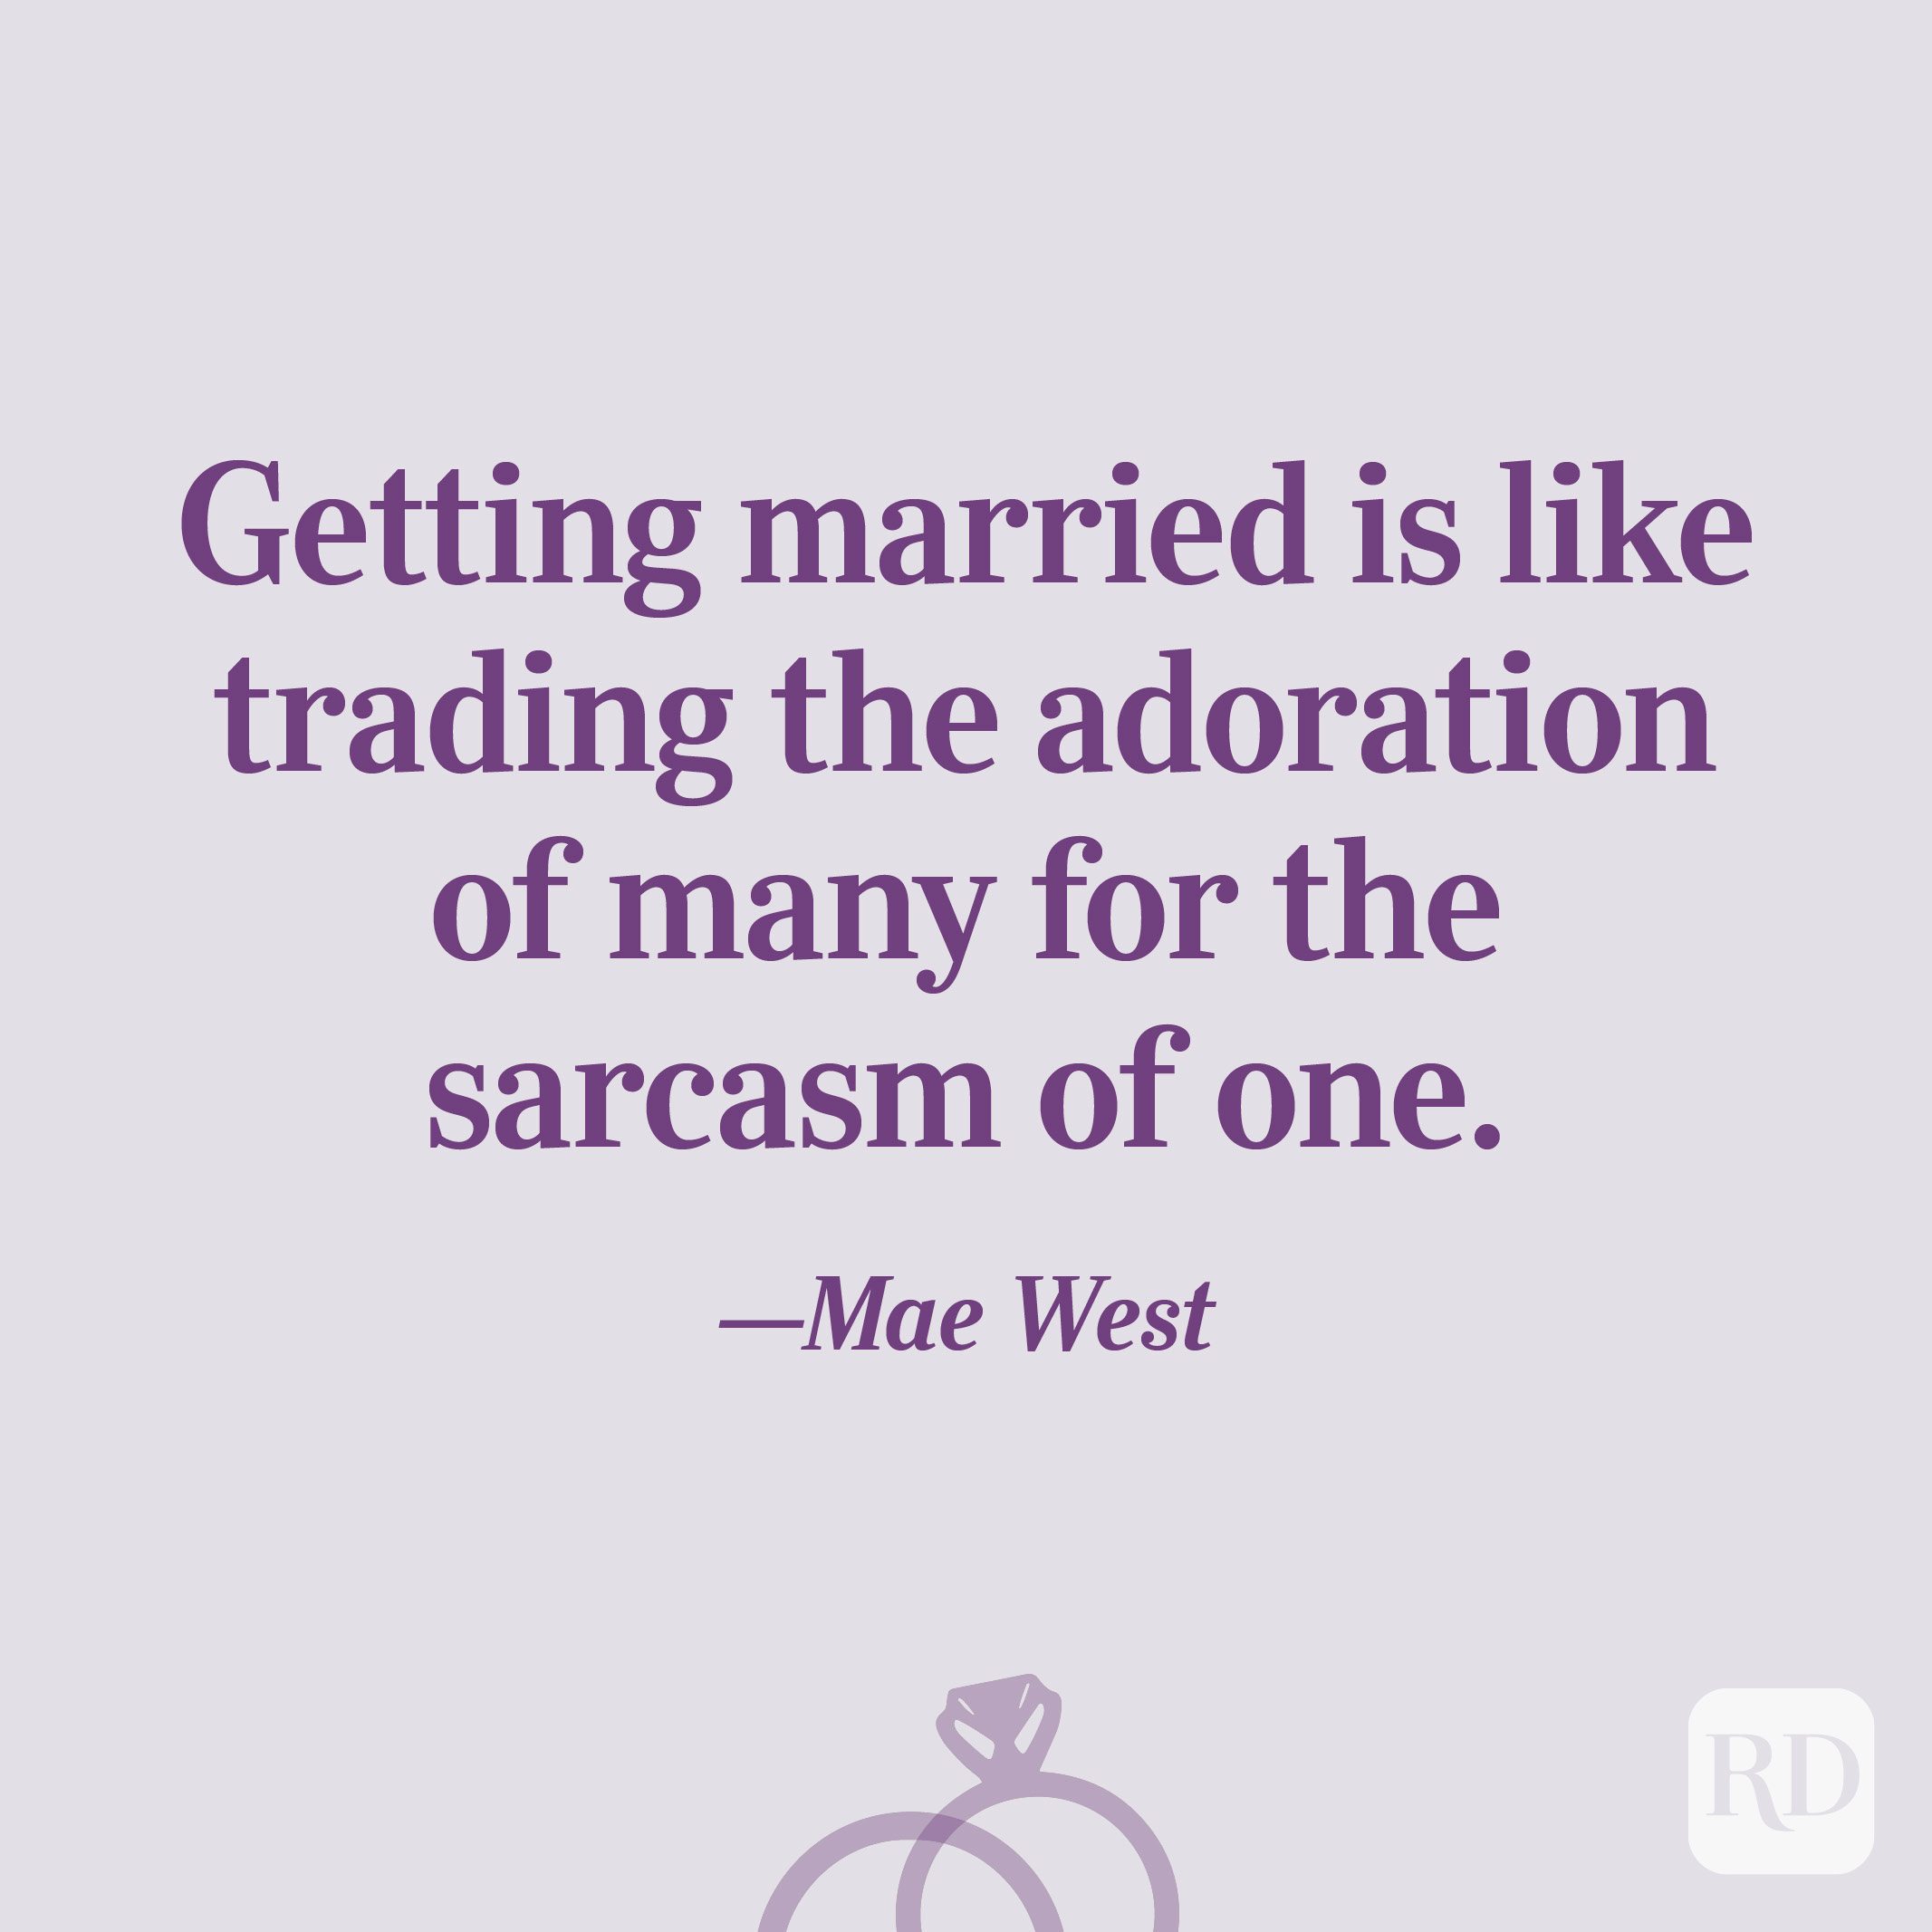 40 Funny Marriage Quotes That Might Actually Be True | Reader's Digest